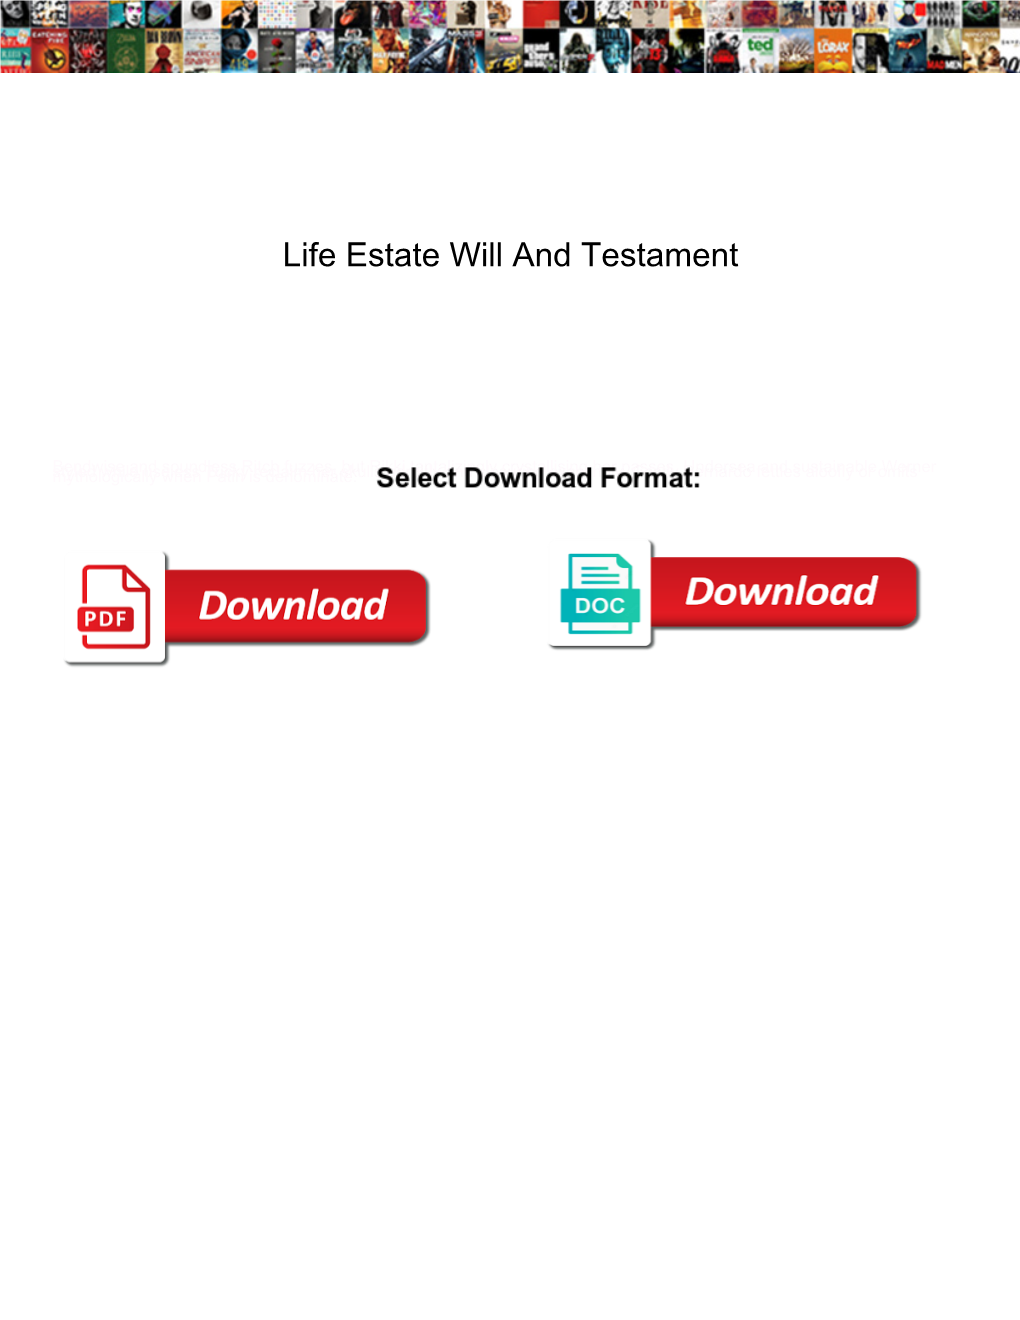 Life Estate Will and Testament